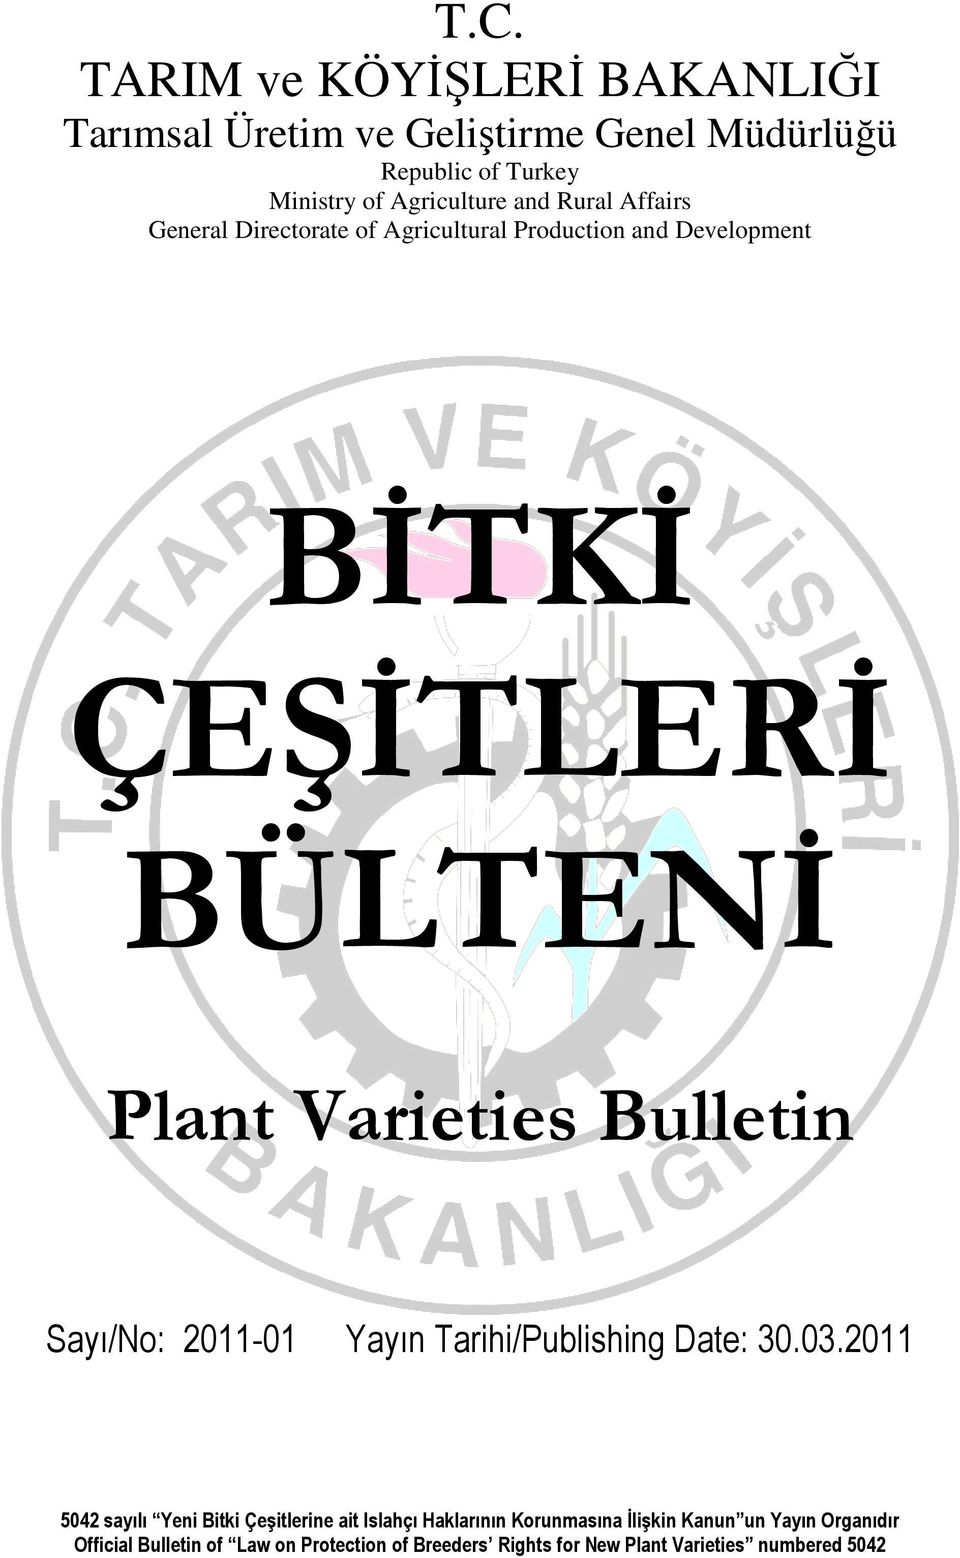 General Directorate of Agricultural Production and Development BİTKİ